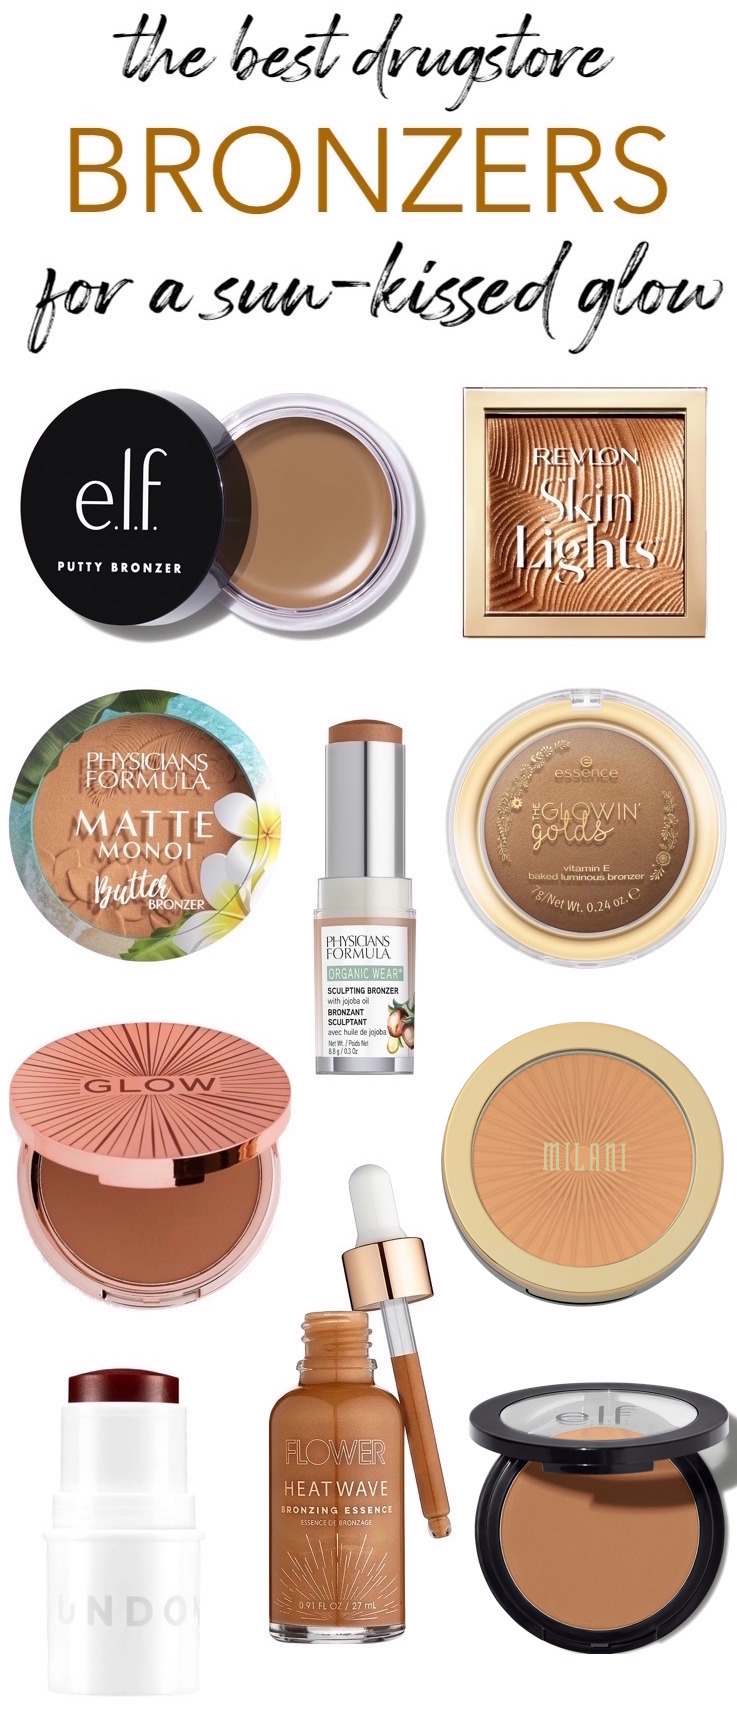 Sun-kissed skin without the sun damage! Get a gorgeous golden glow with these best drugstore bronzers that give your complexion a beautiful warmth all year long!